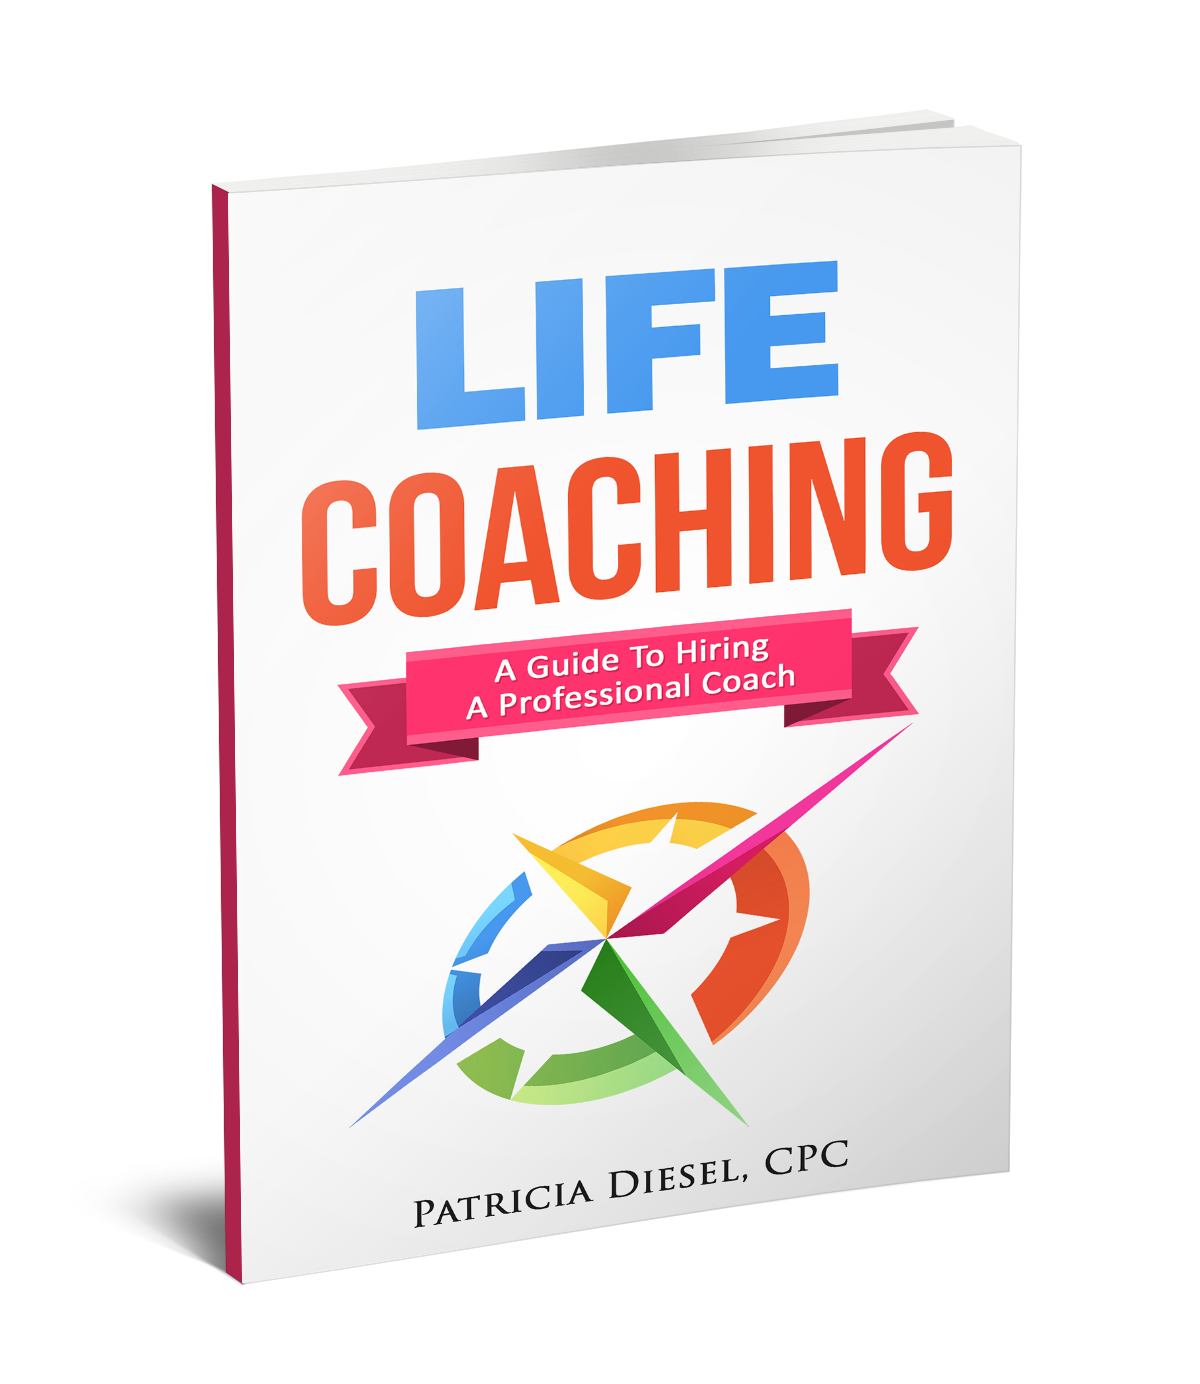 Life coaching by patricia diesel